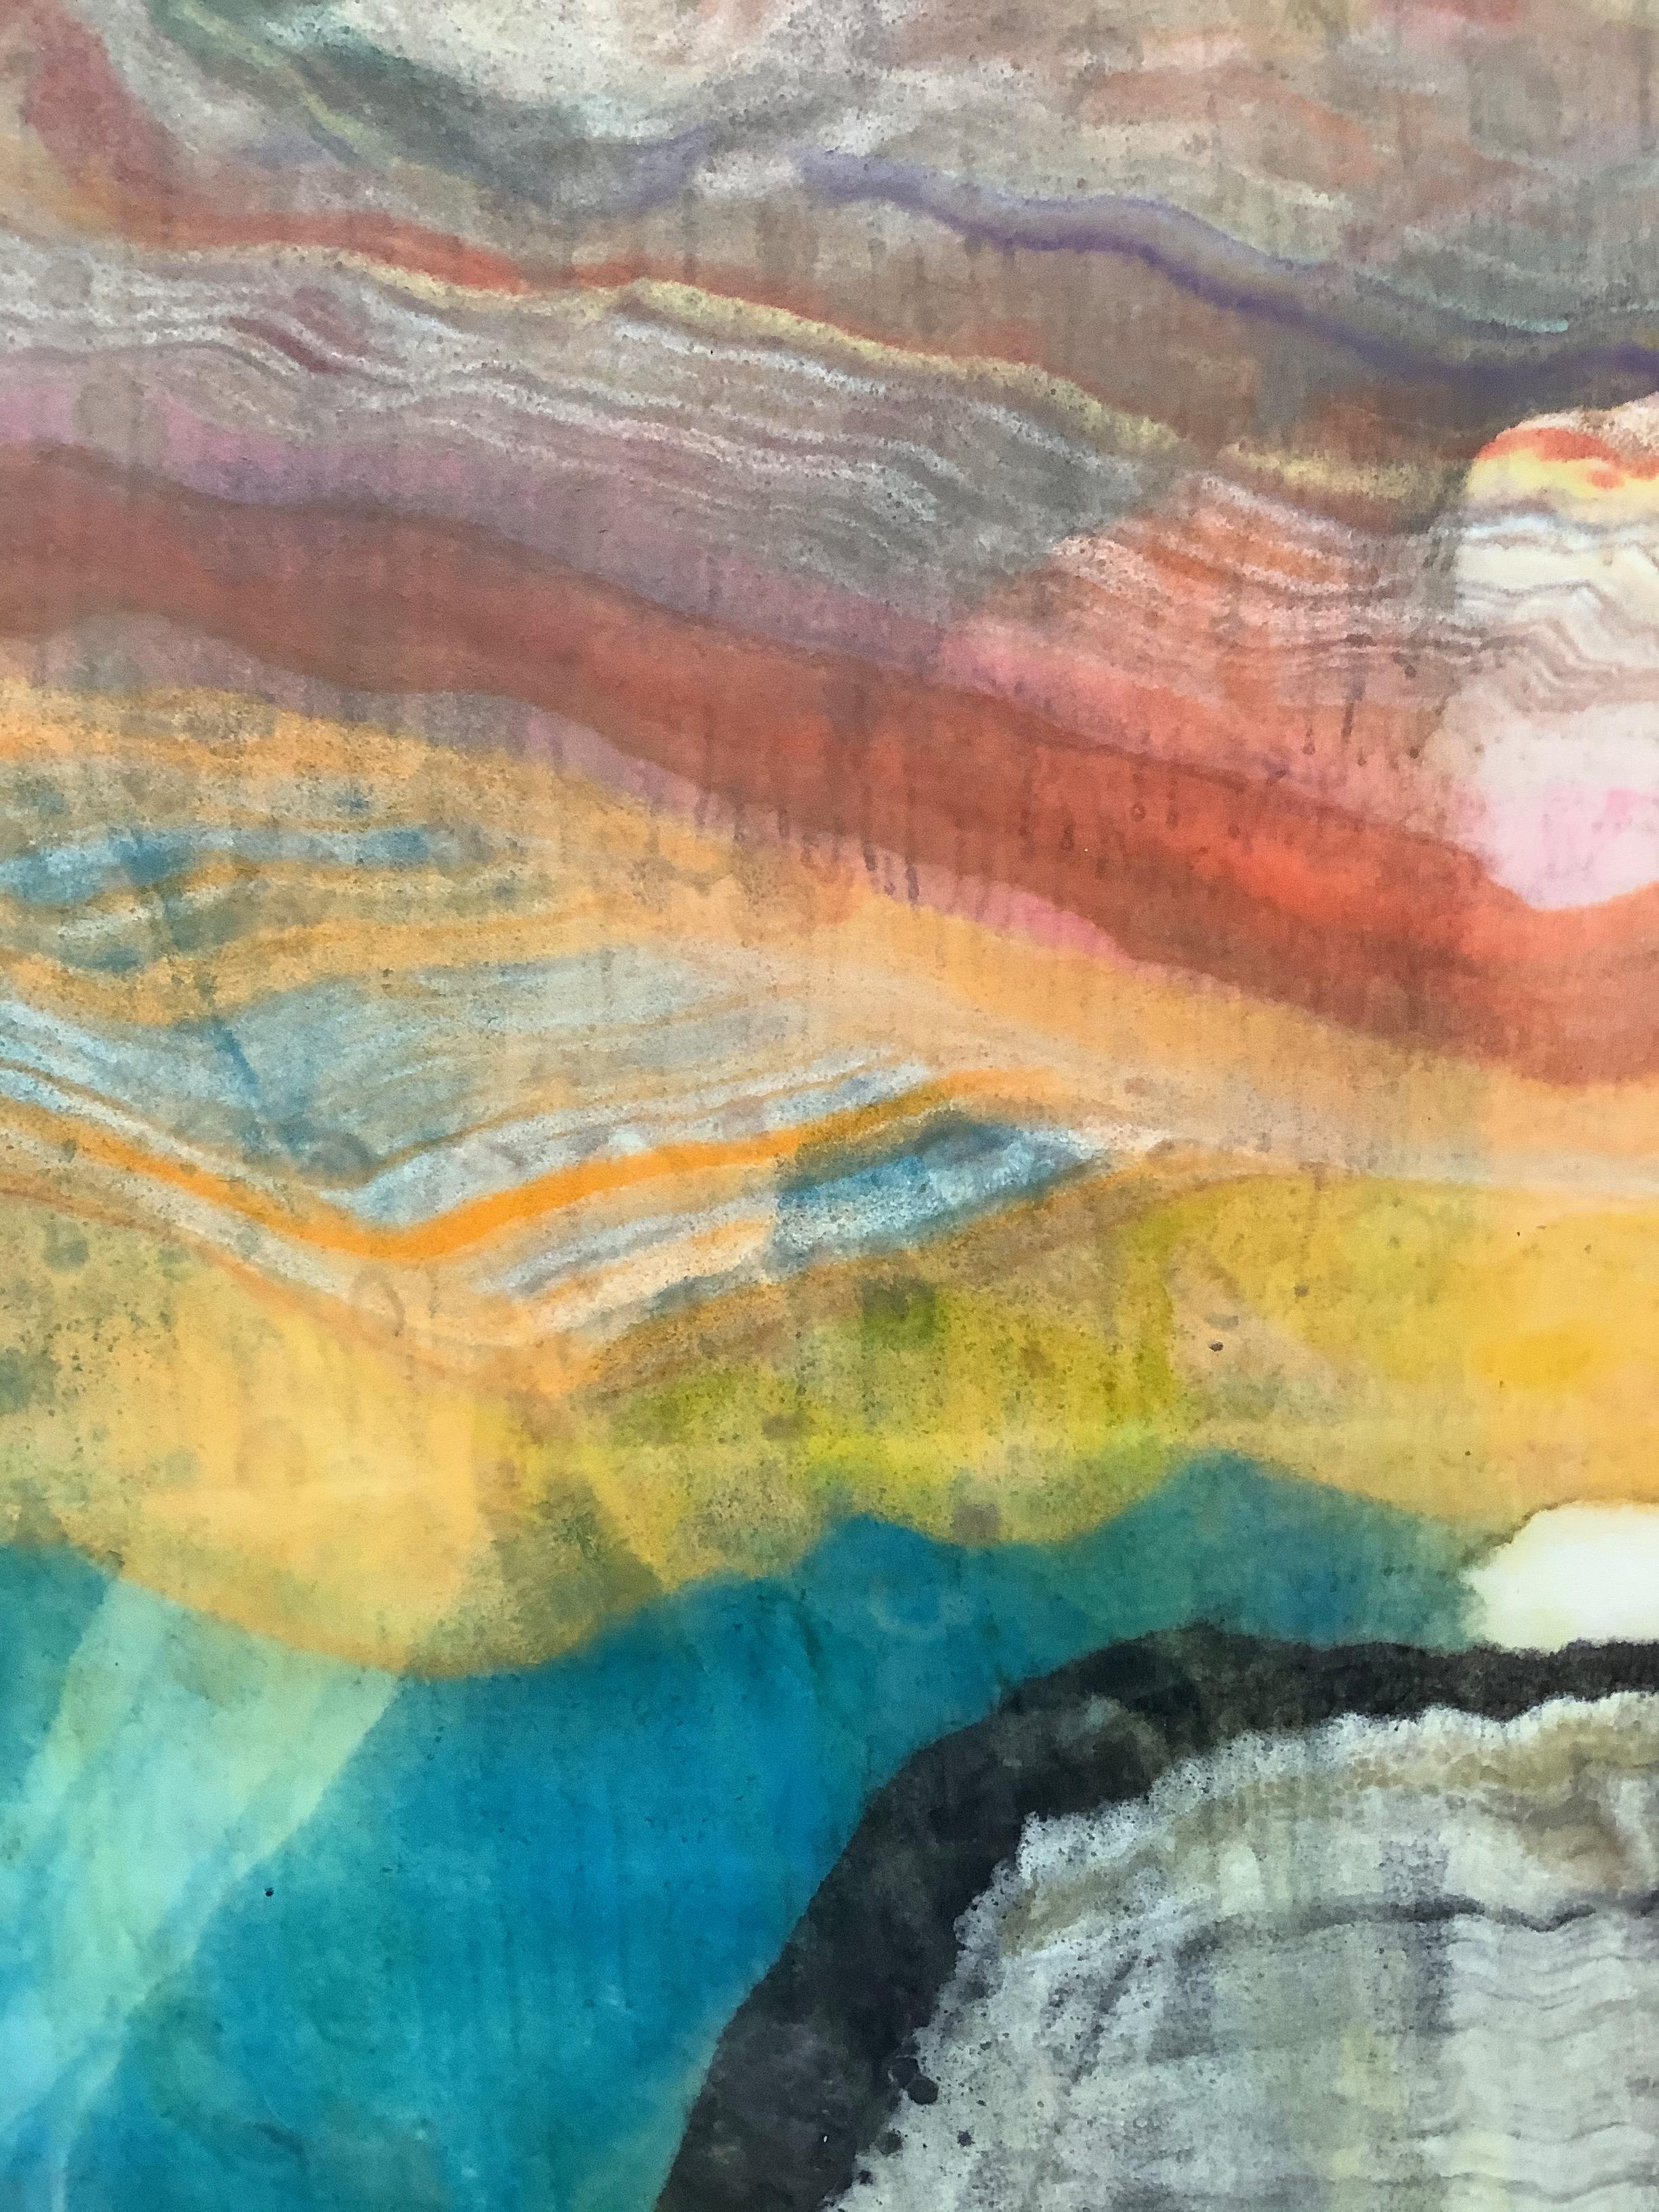 A Sign of Time Two is a multicolored encaustic monotype on paper. Layers of pigmented beeswax on lightweight Japanese kozo paper create an undulating composition suggesting layers of the earth's crust and geological formations depicted in bright